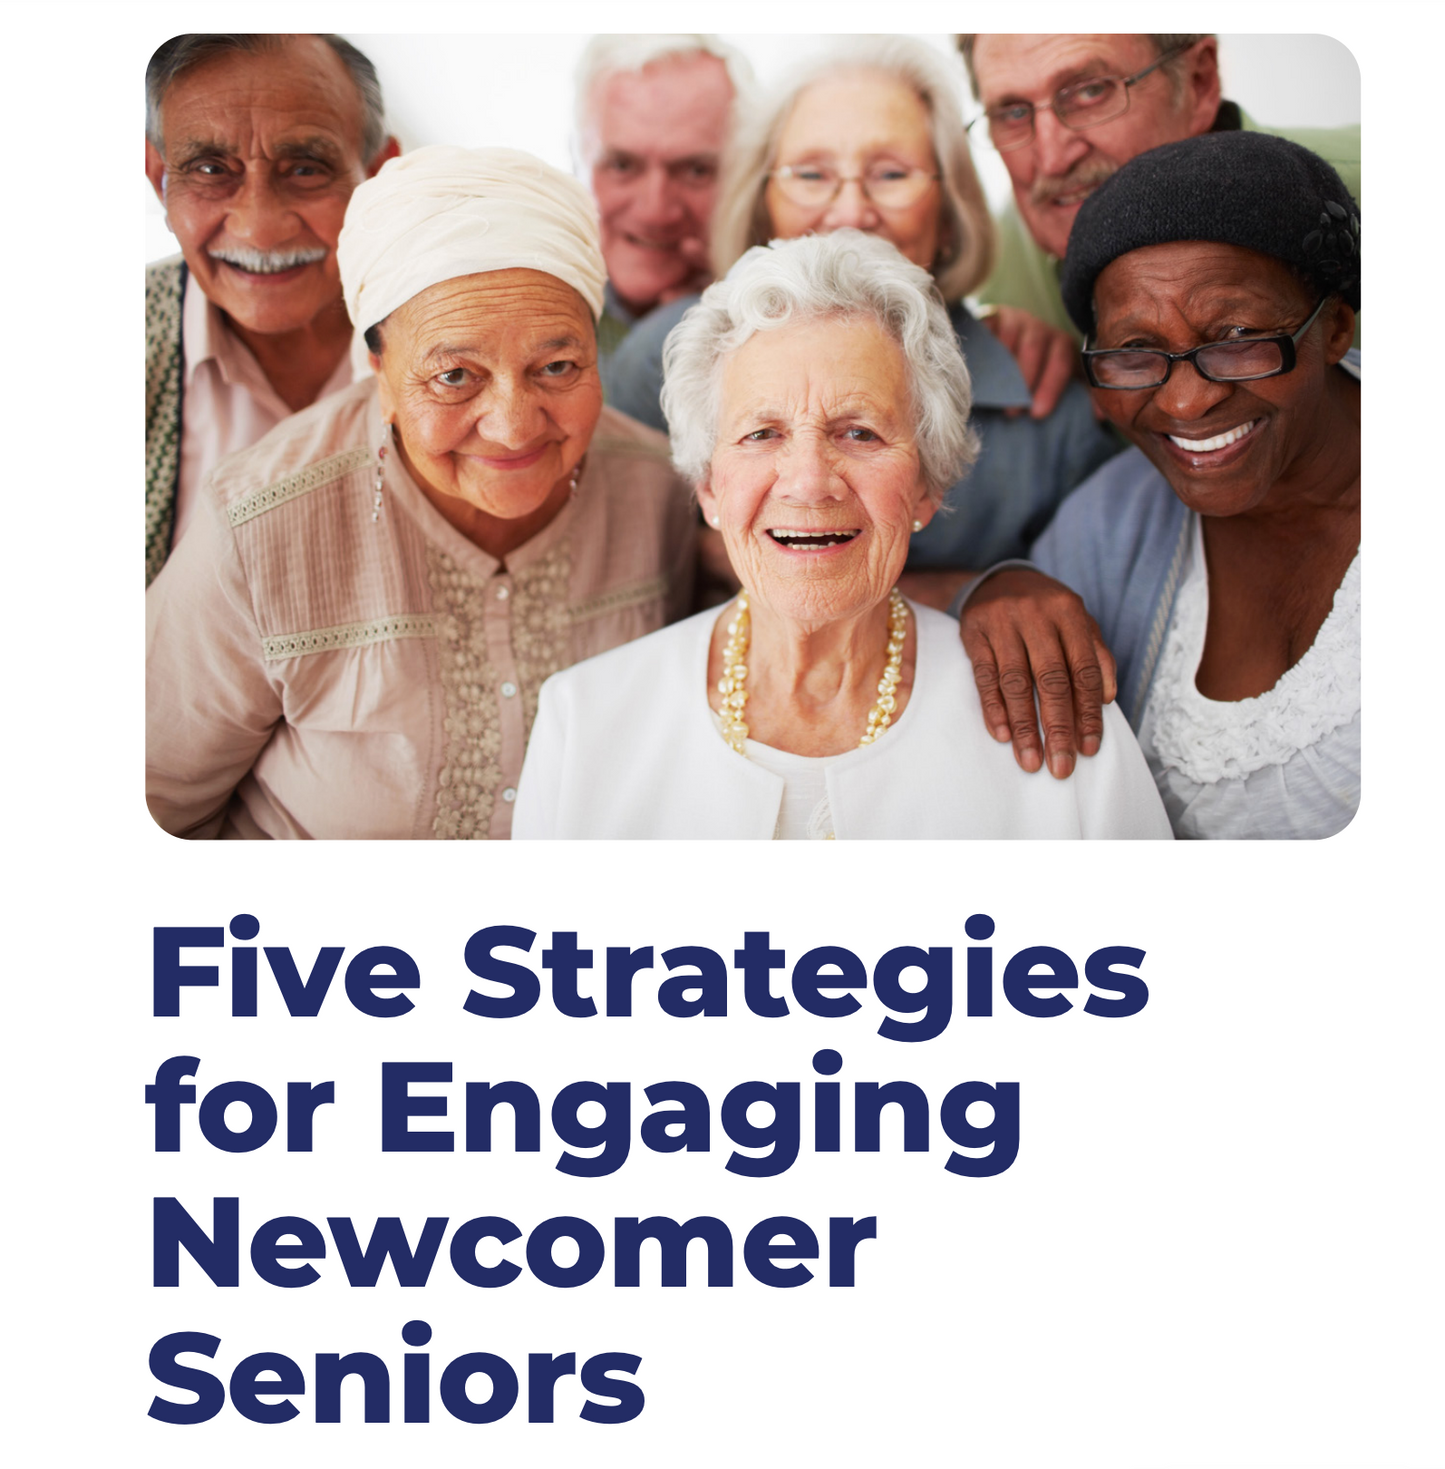 Five Strategies for Engaging Newcomer Seniors